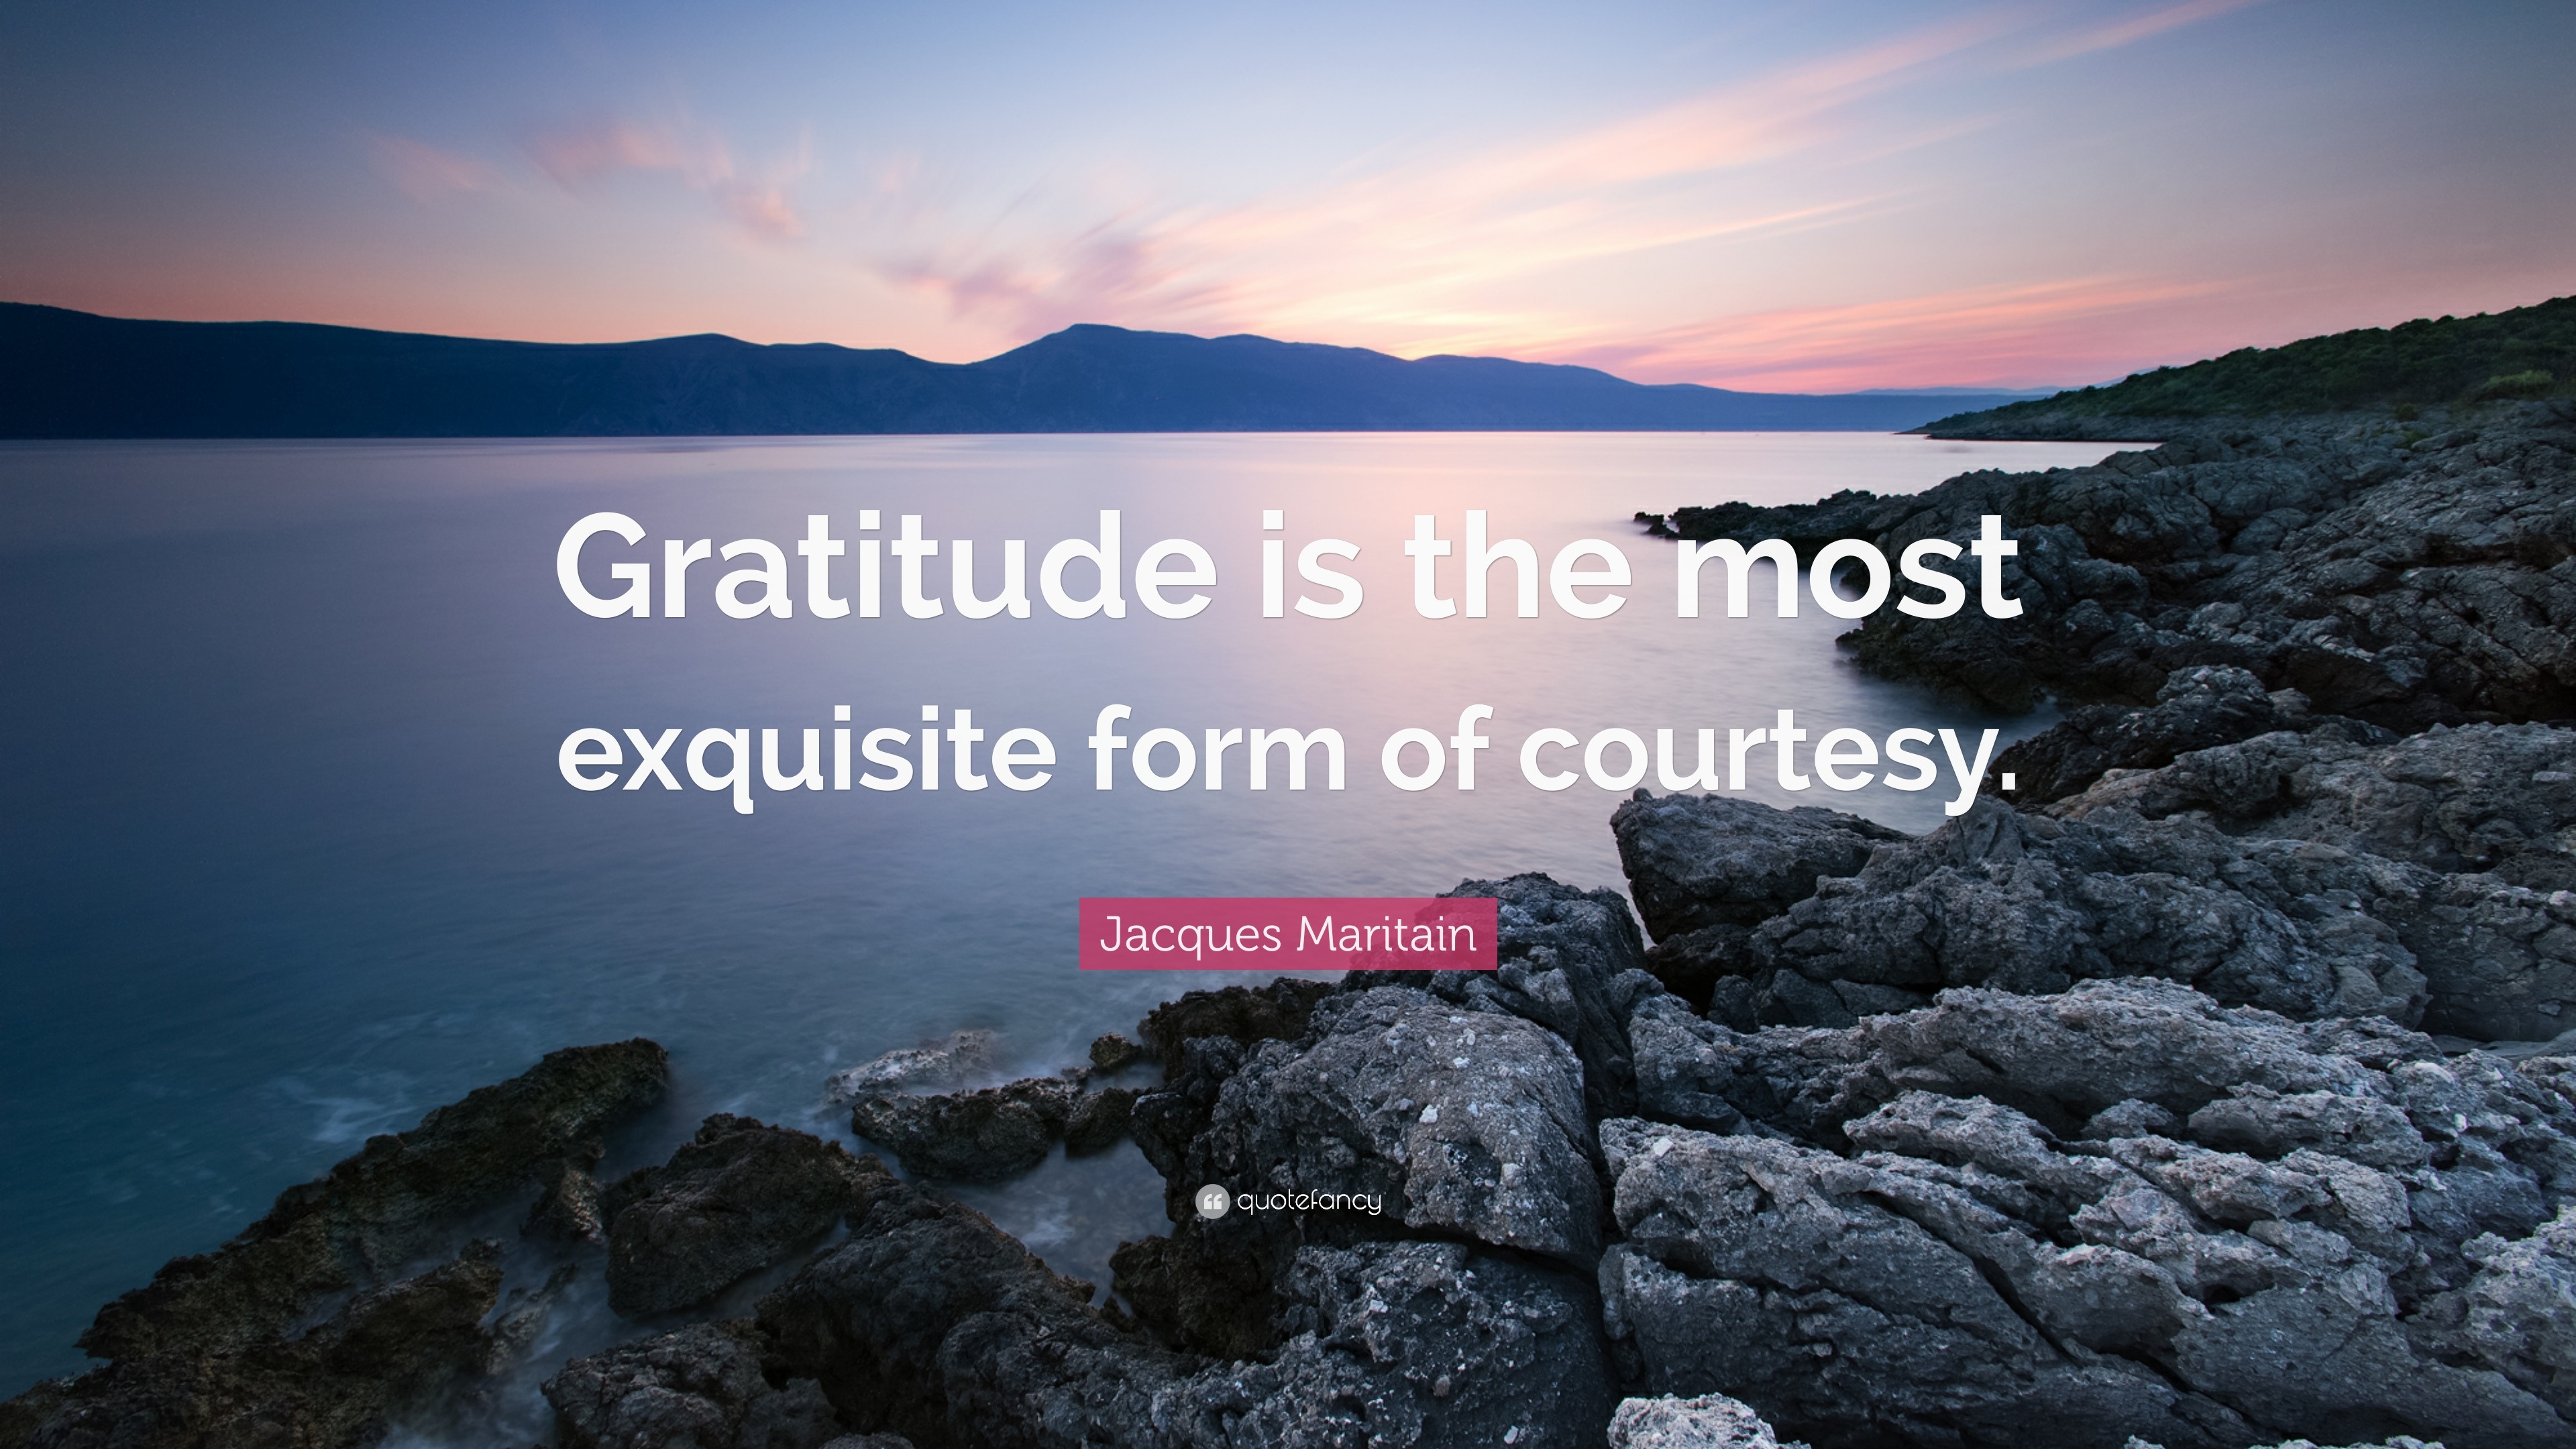 Jacques Maritain quote: Gratitude is the most exquisite form of